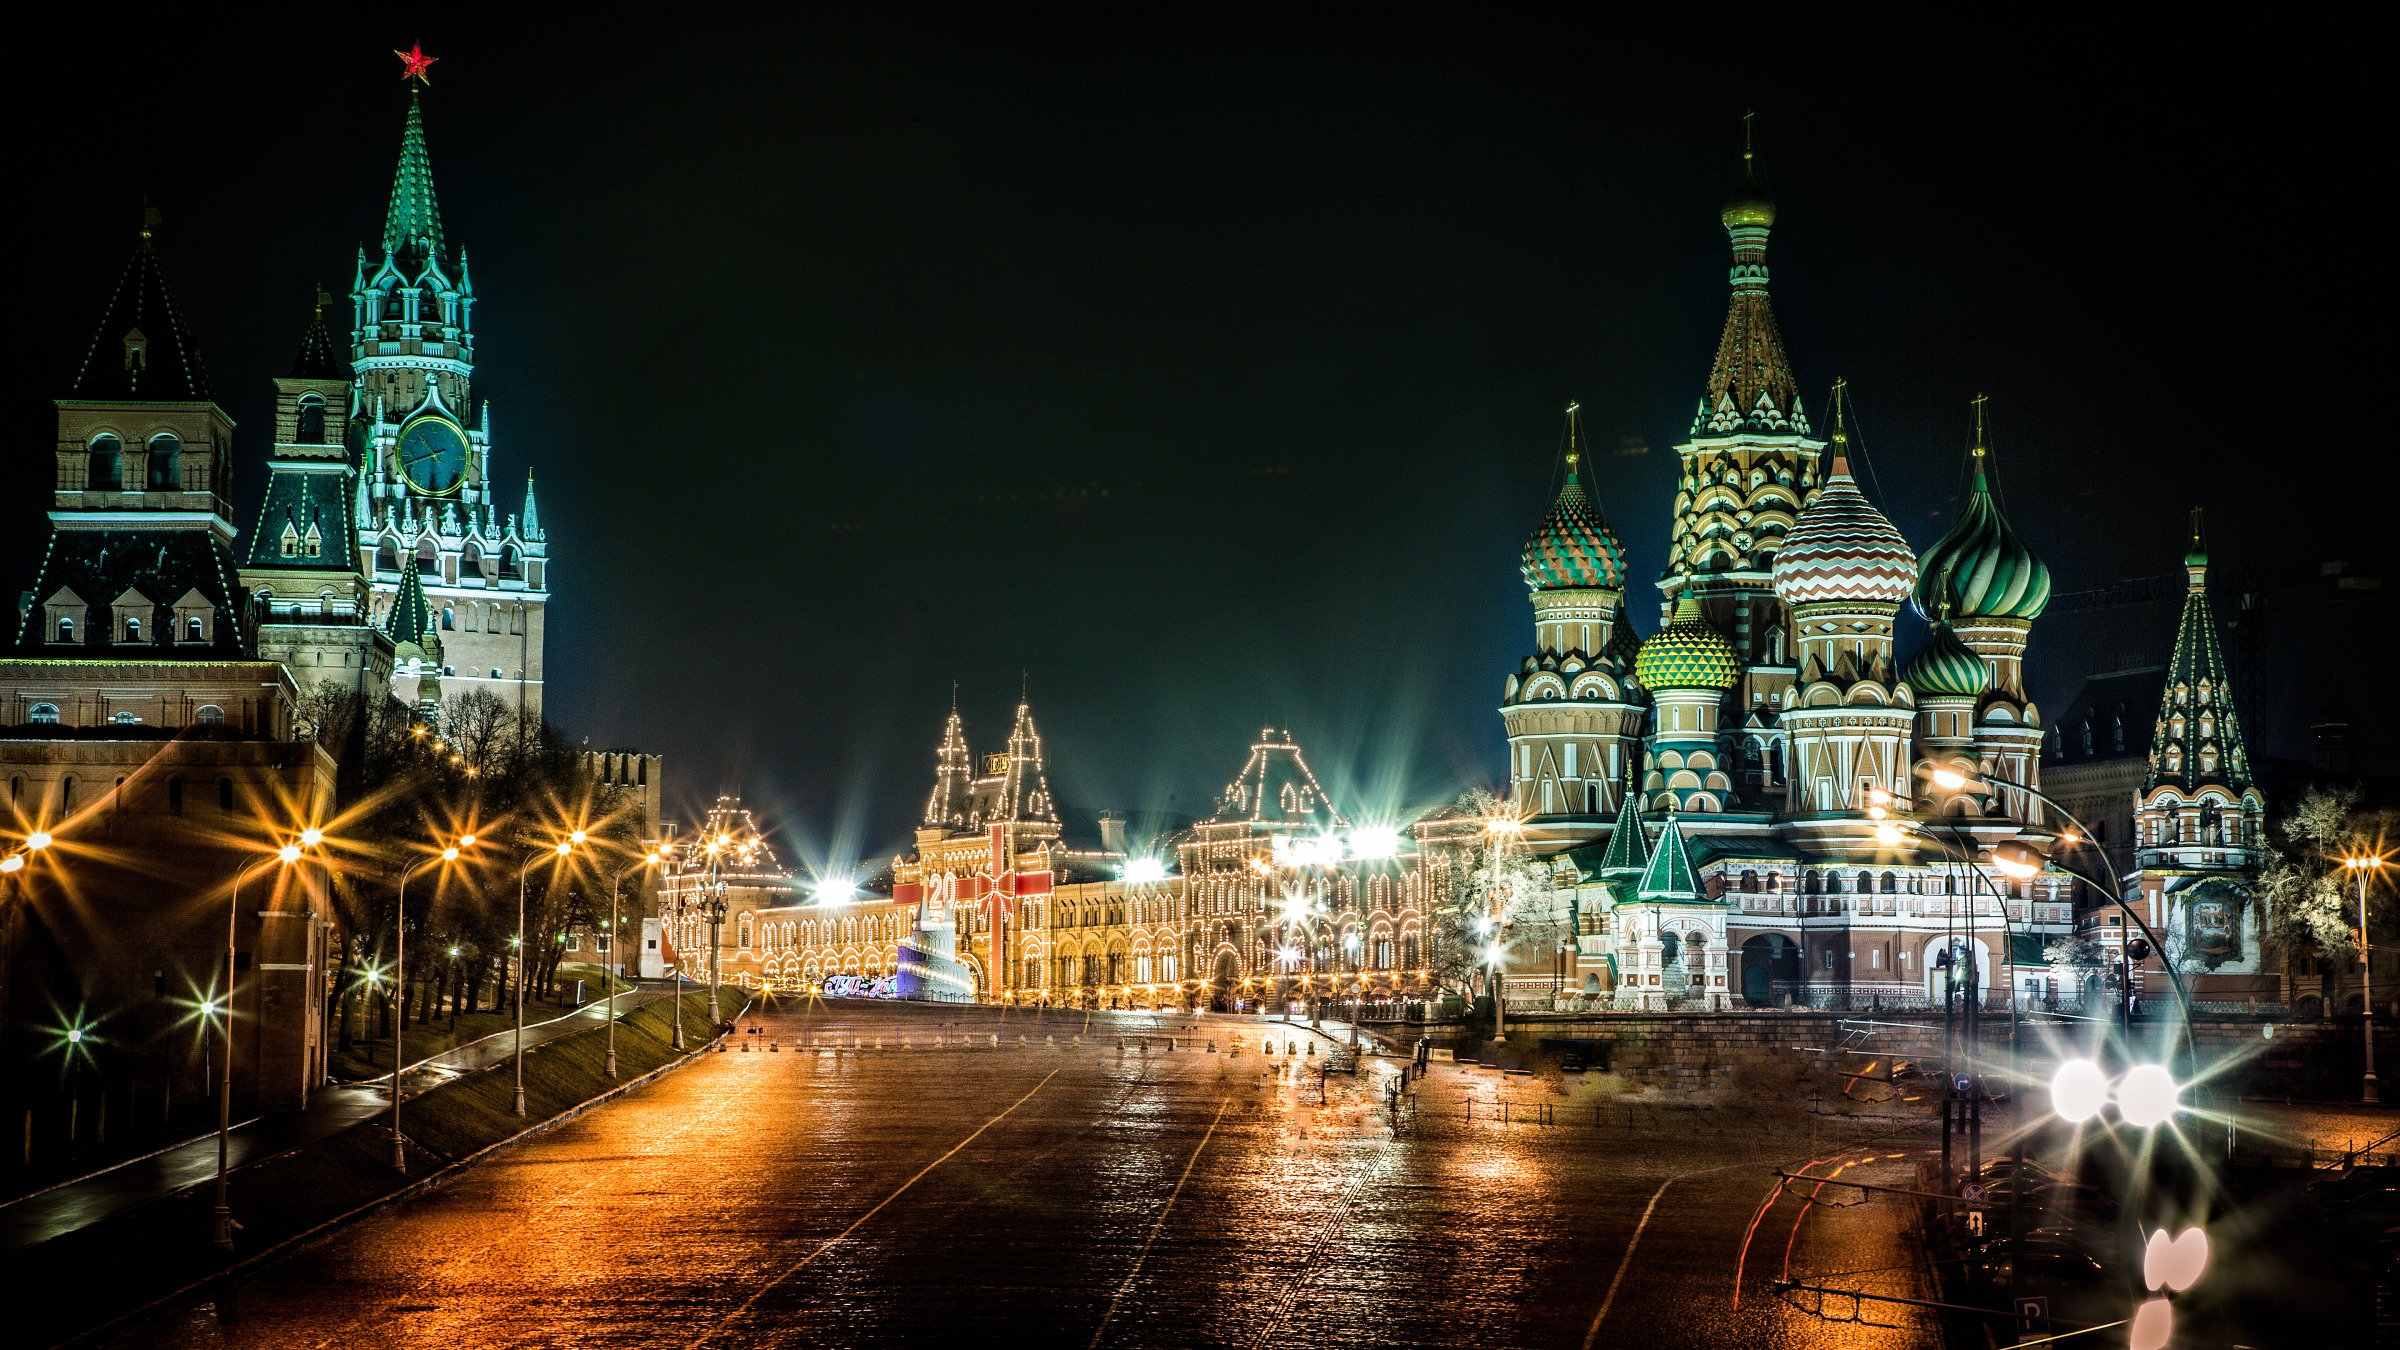 Red Square by Night, Moscow, Russia widescreen wallpaper. Wide